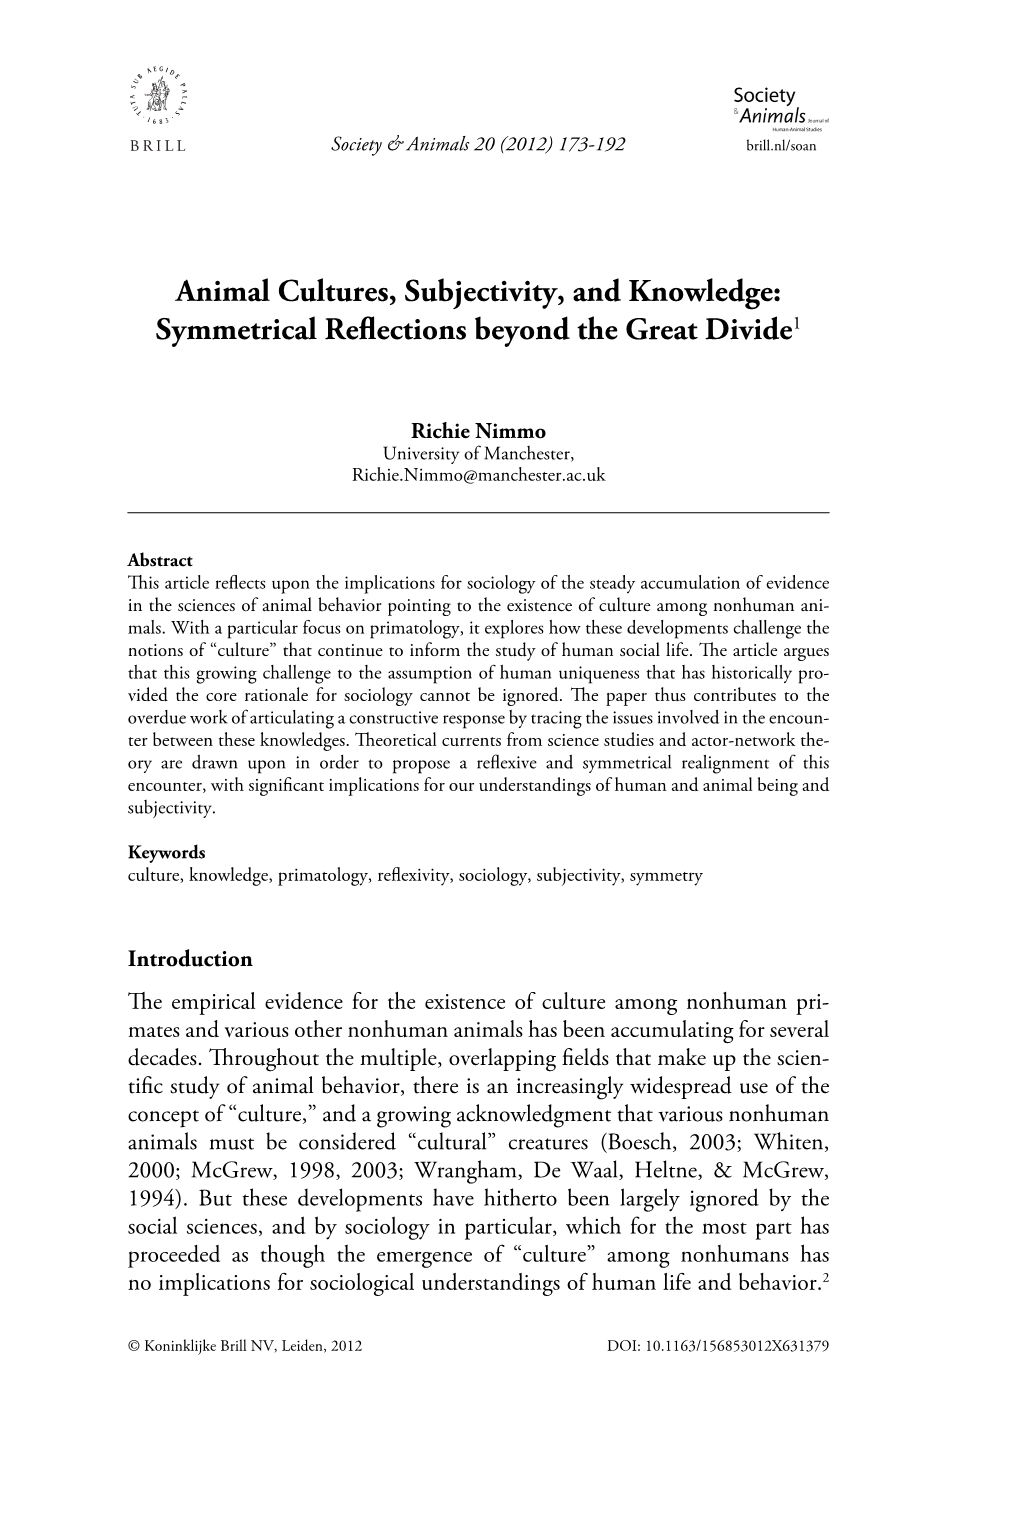 Animal Cultures, Subjectivity, and Knowledge: Symmetrical Reflections Beyond the Great Divide1